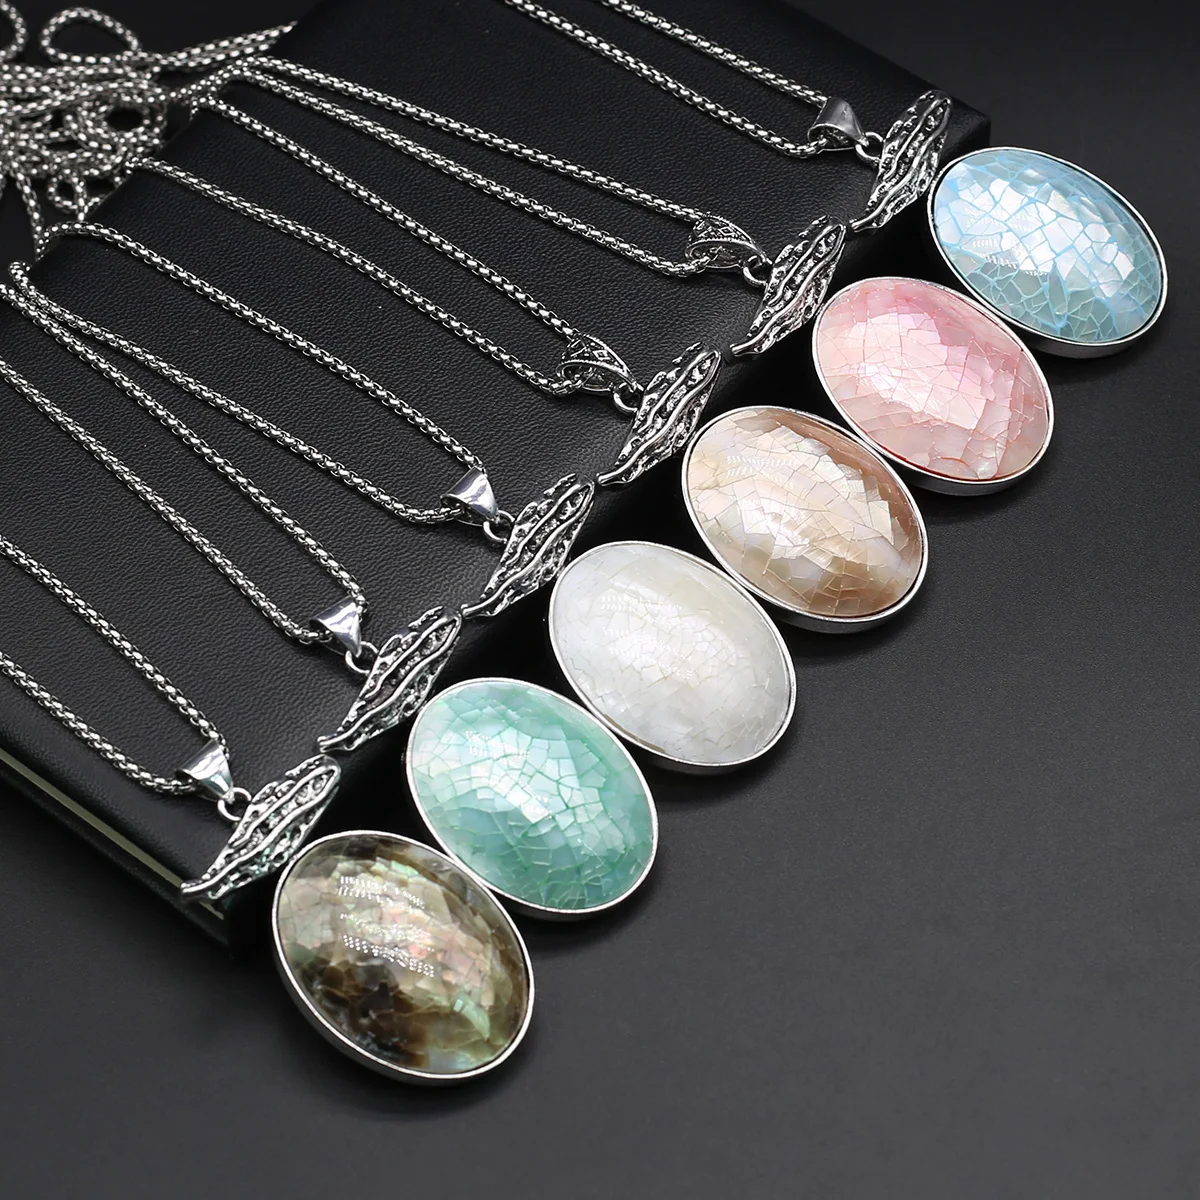 

Natural Stone Agate/Shell/Opal Stone/Egg Shaped Pendant Metal Chain Necklace Reiki Heal Women's Jewelry Gift 33x56mm